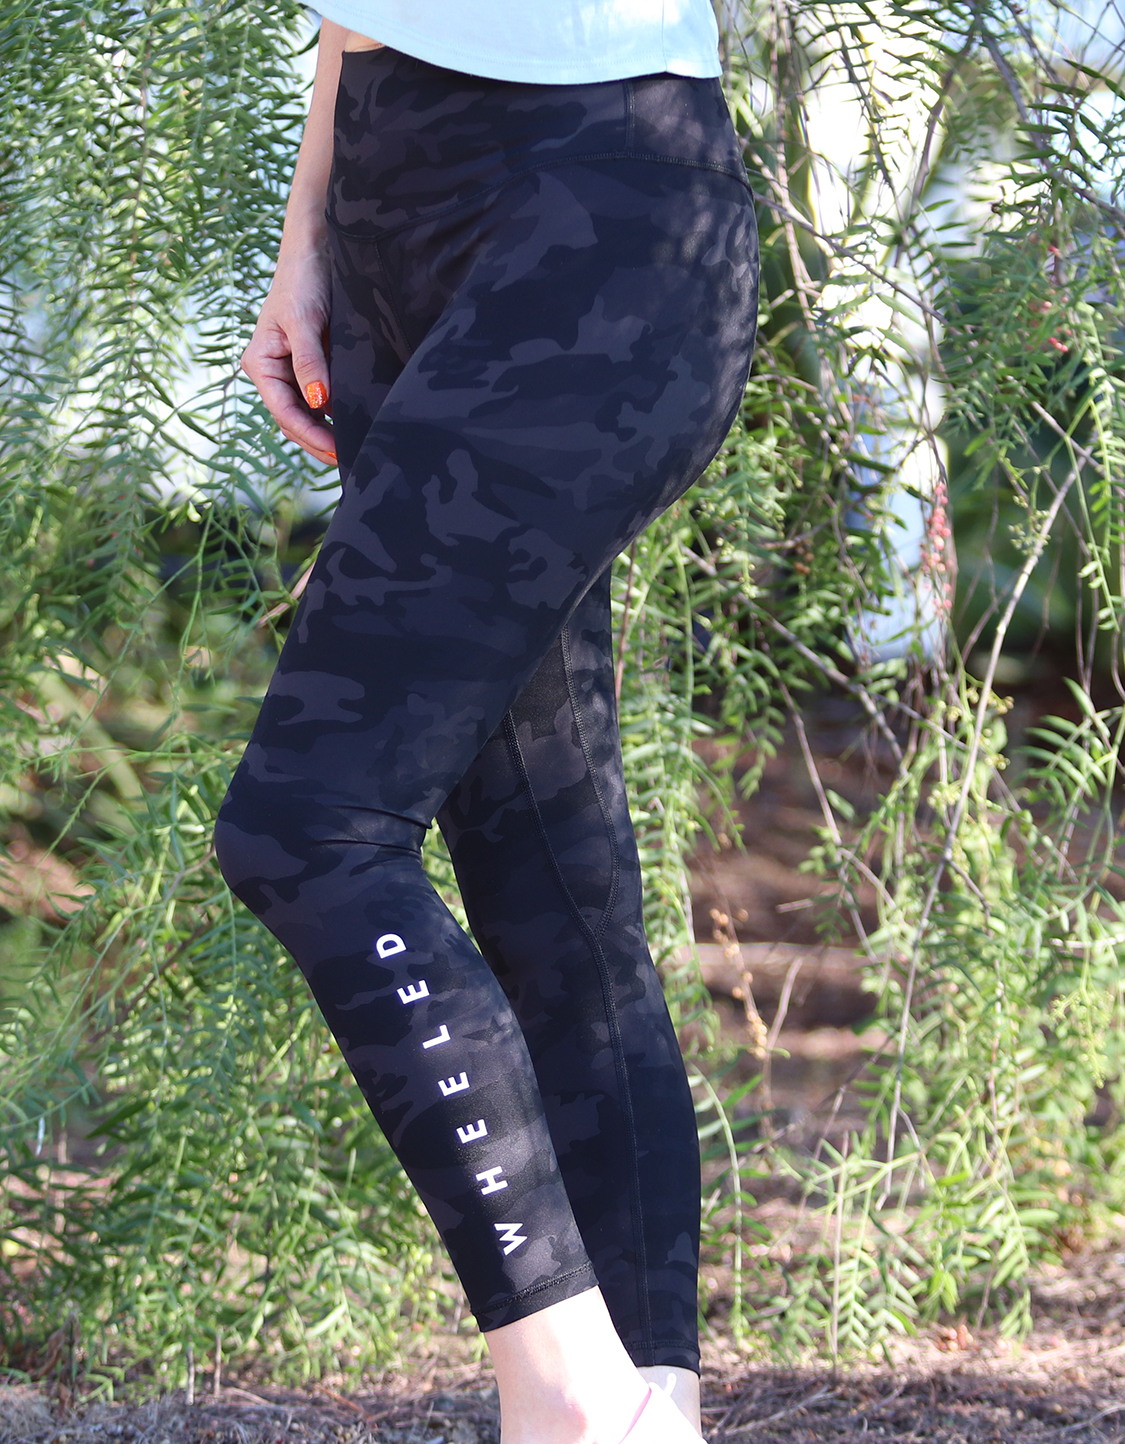 Spanx Look at Me Now Seamless Leggings Black Camo Size XL